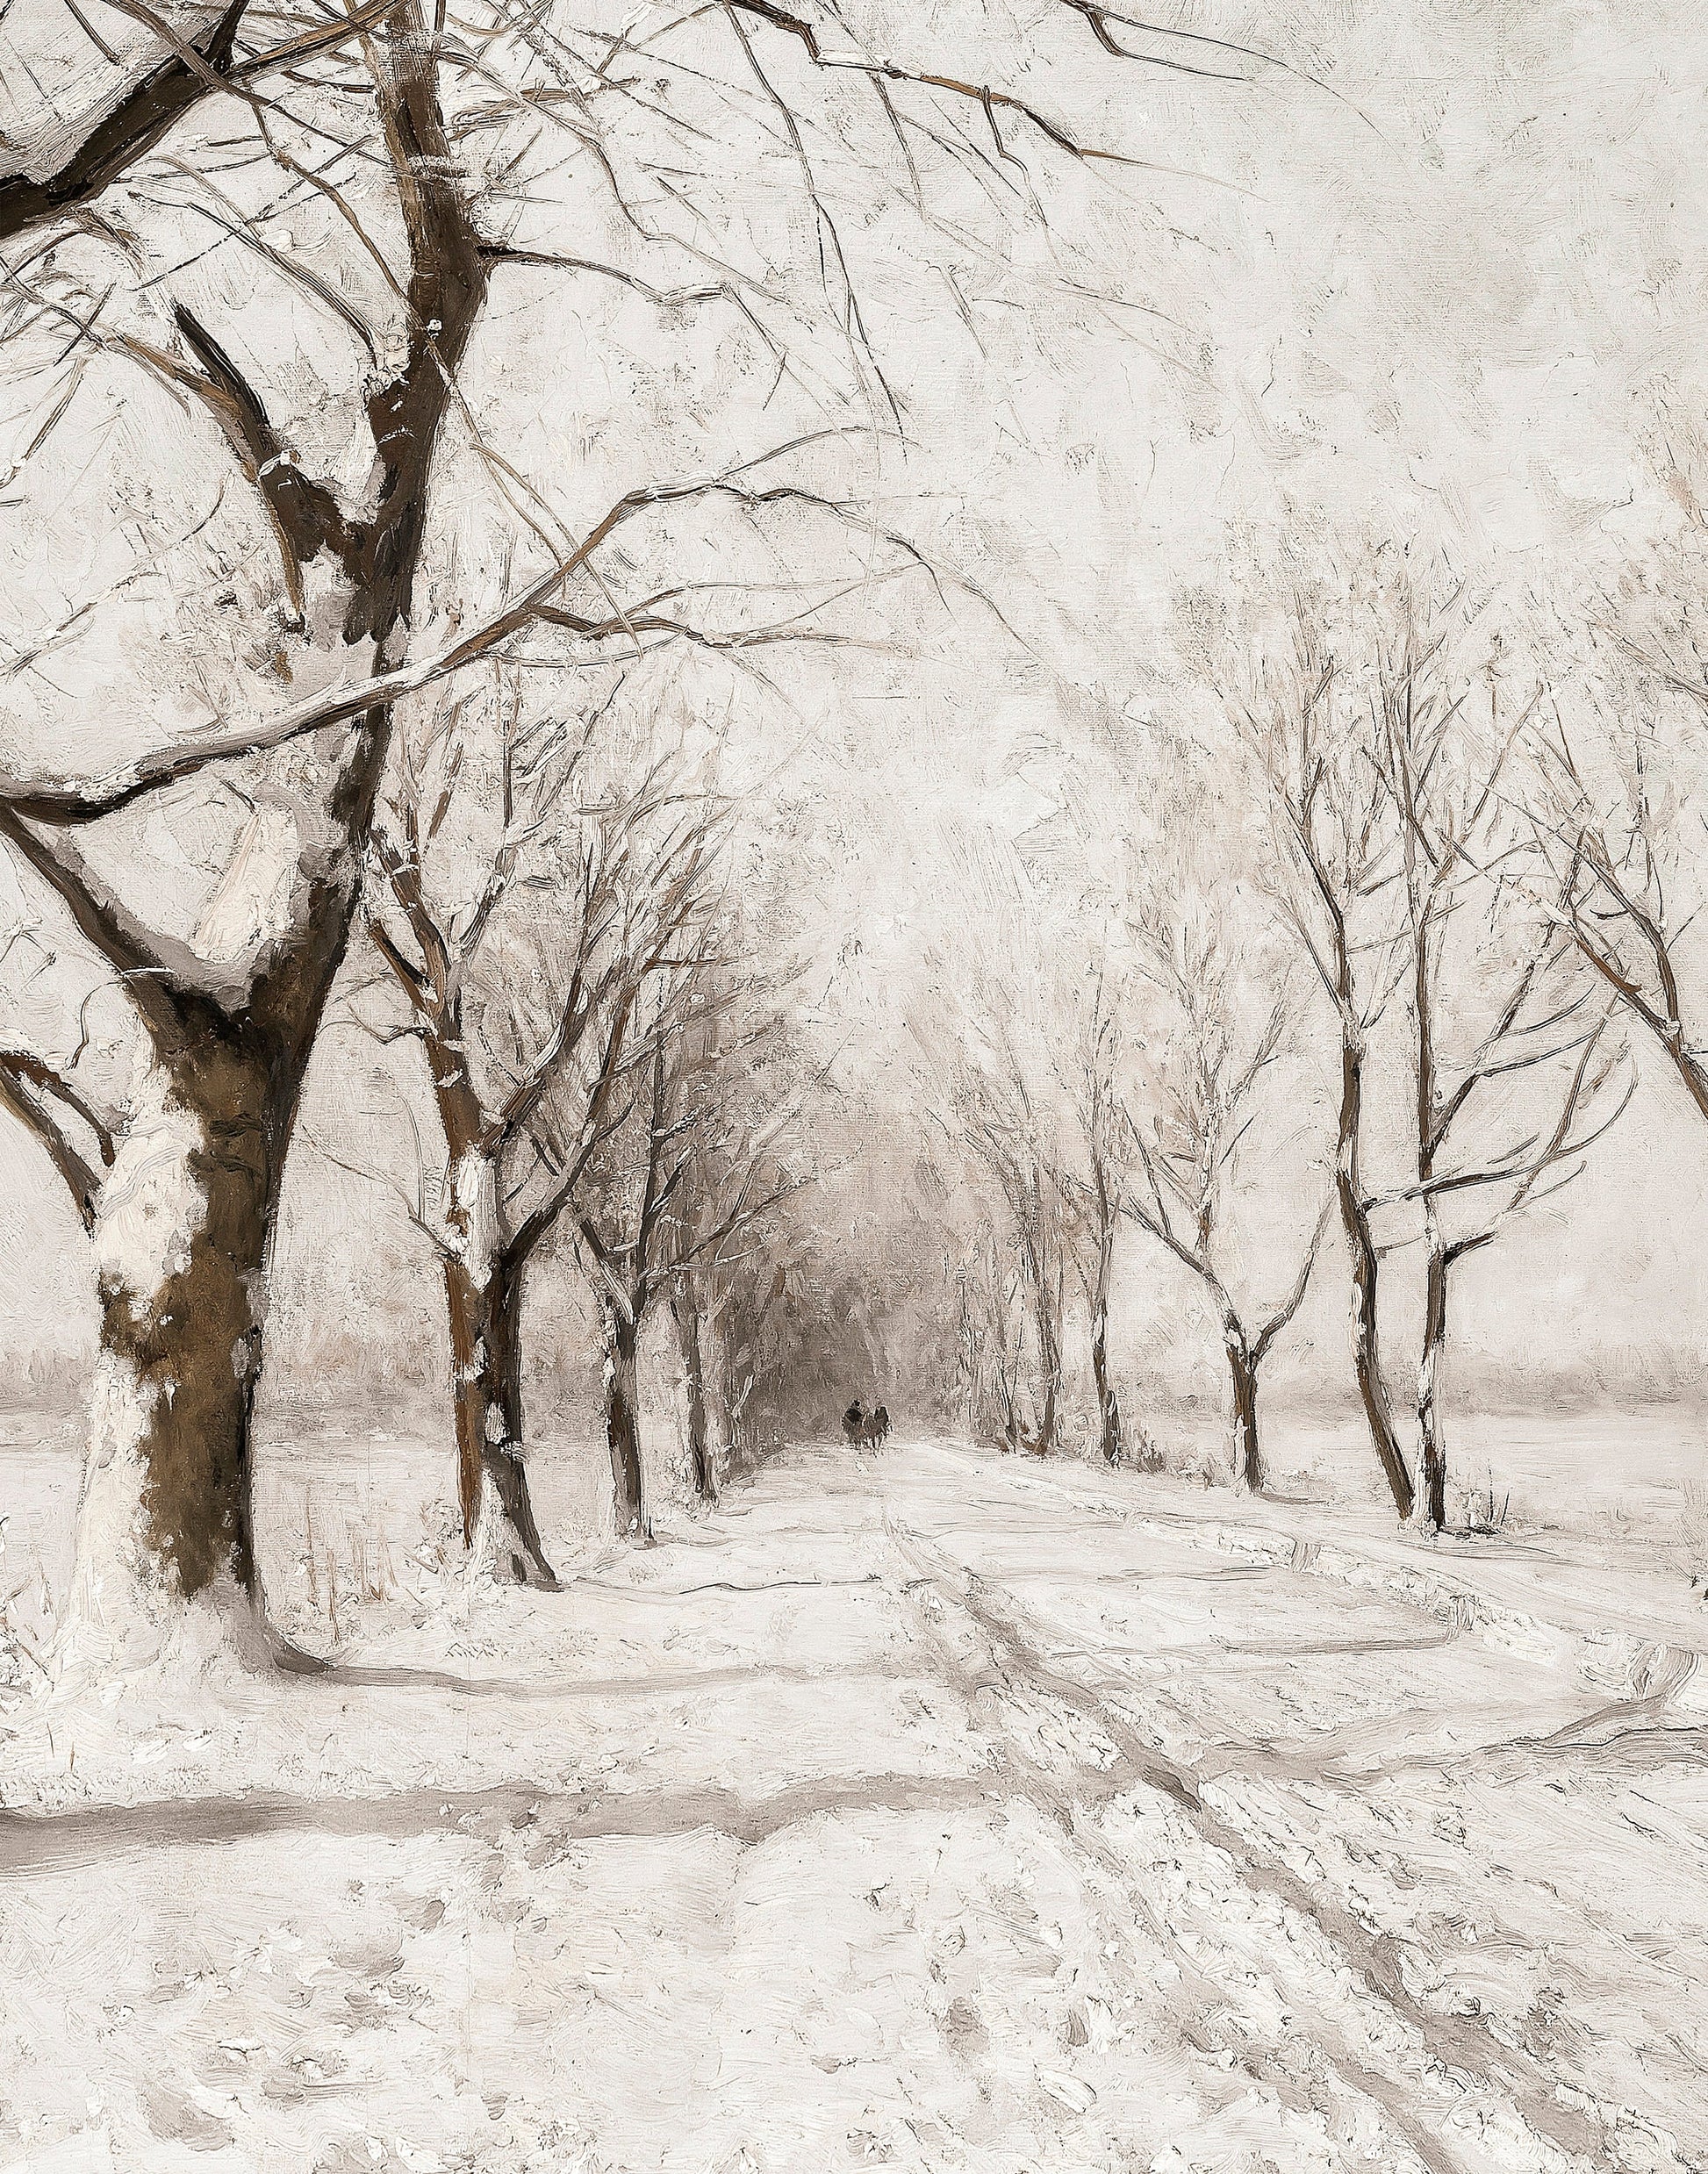 tranquil, peaceful, snowy winter scene, vintage, nostalgic, christmas feeling hanging canvas wall art